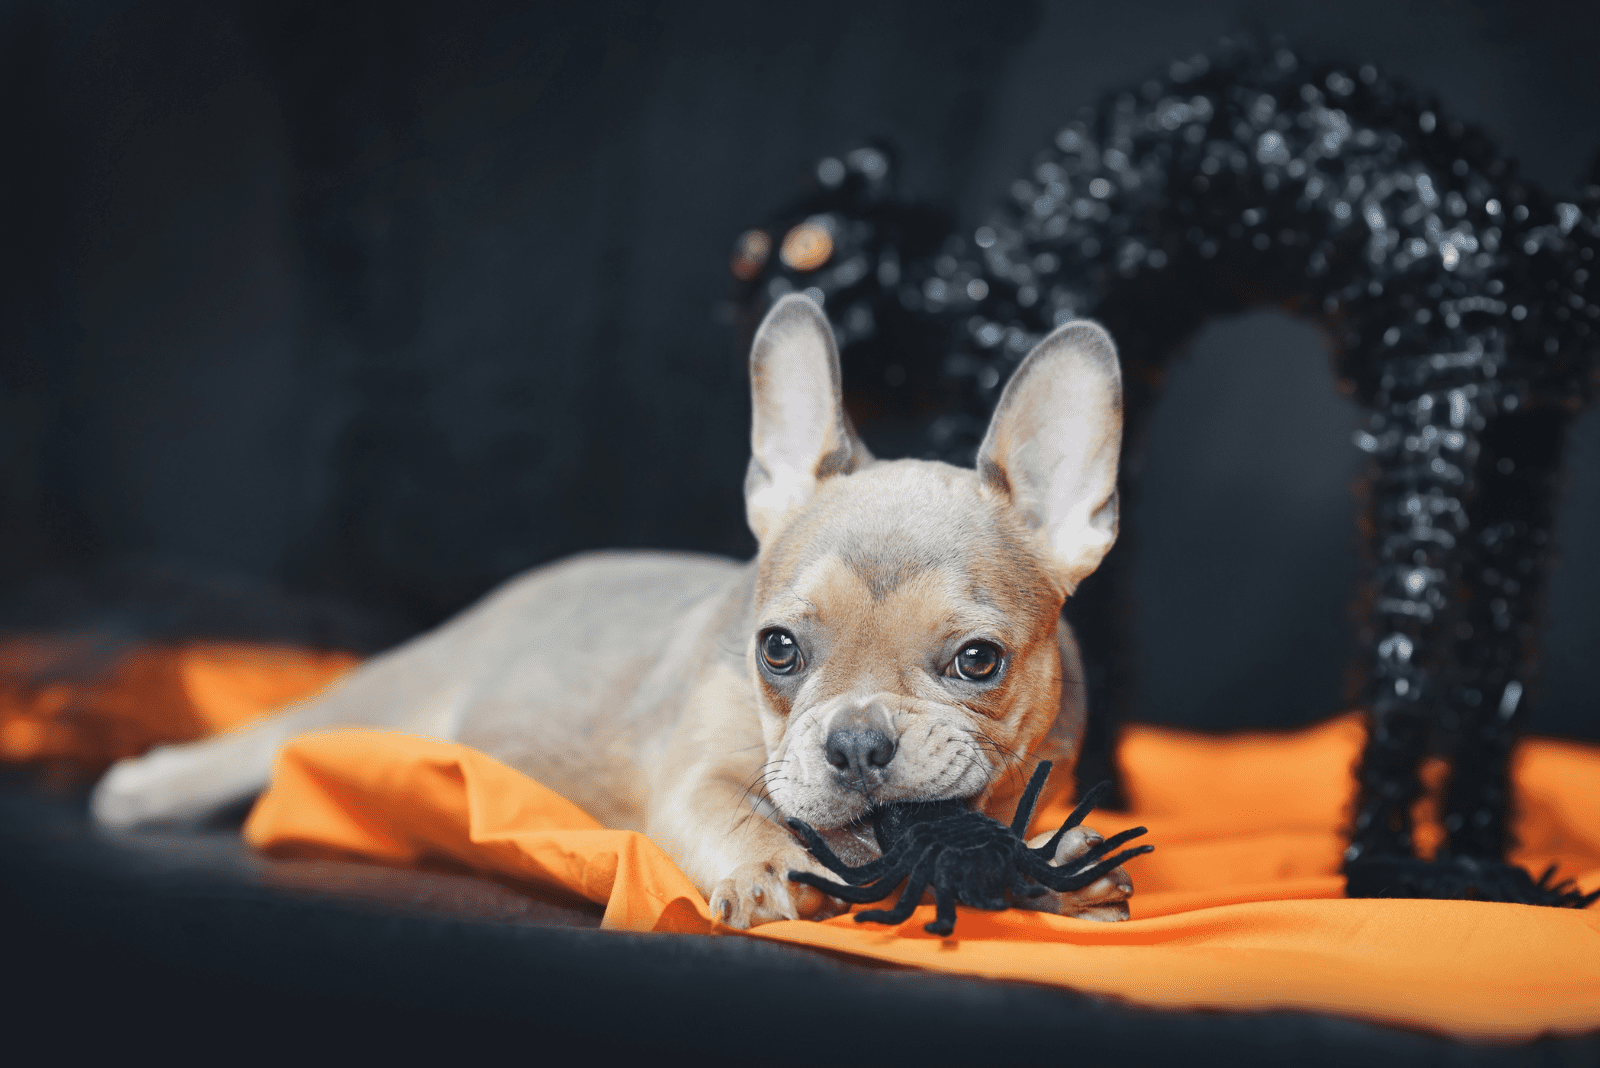 Isabella the French bulldog is lying down and playing with a toy